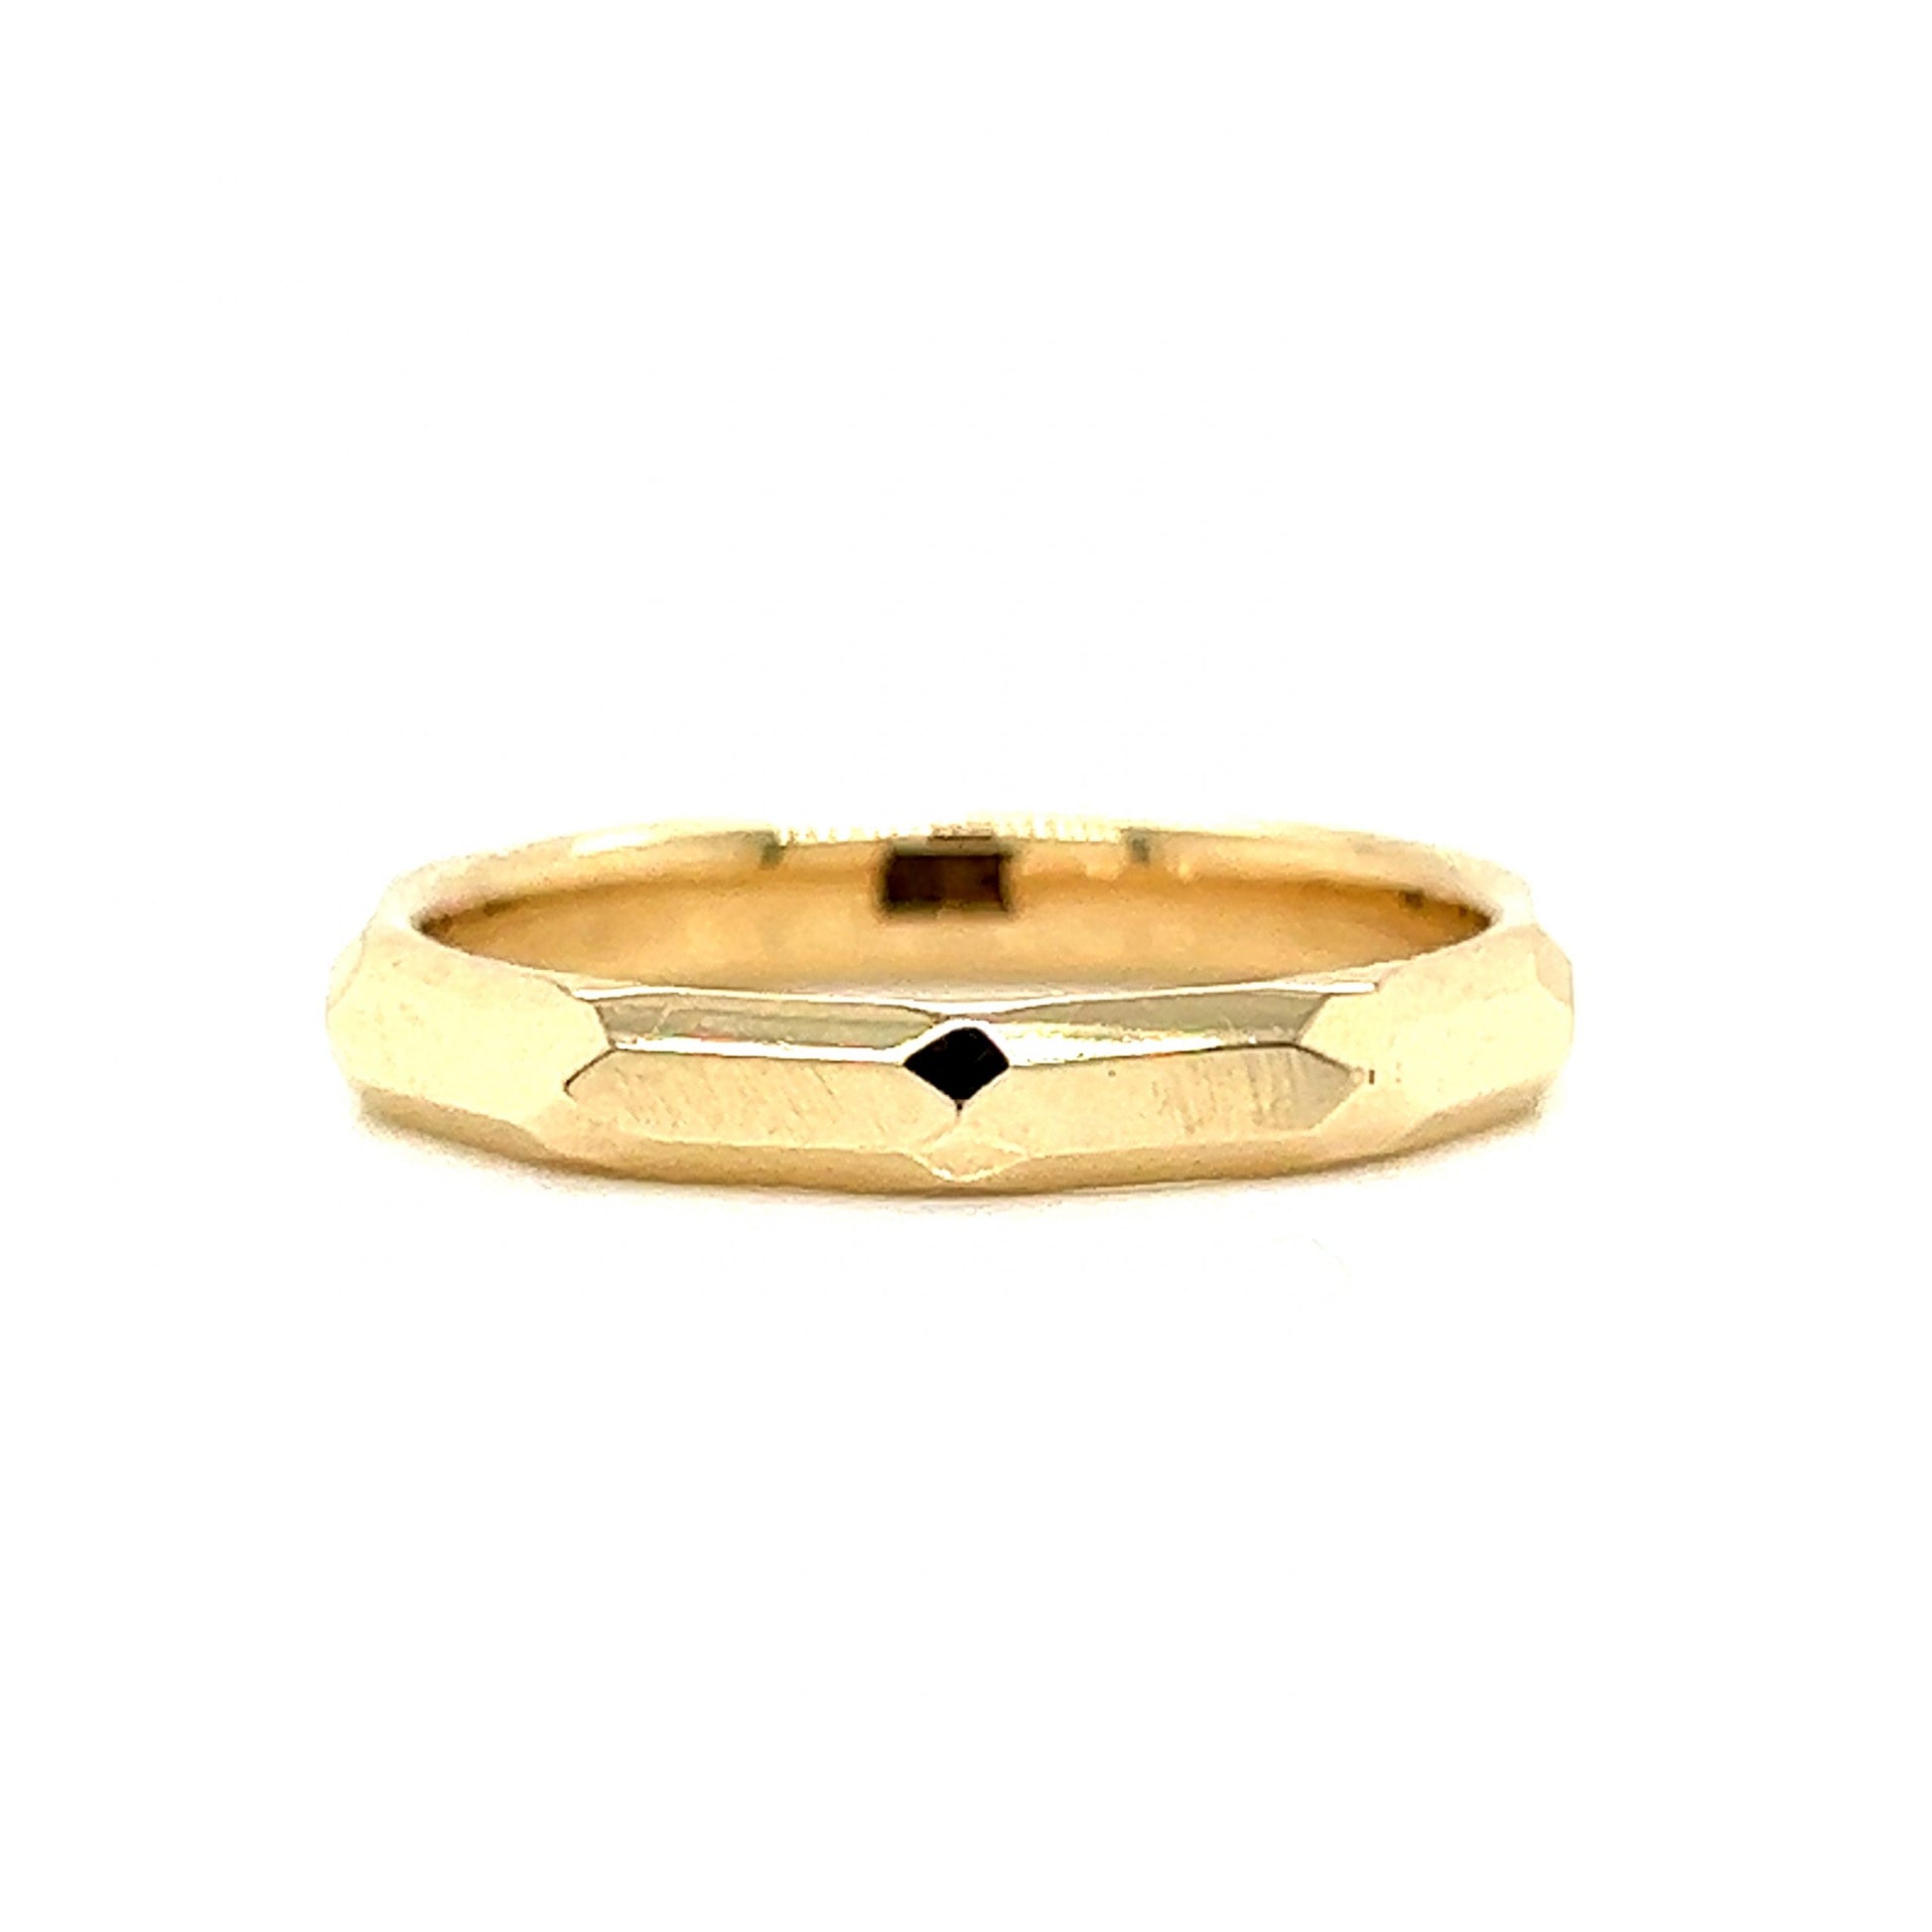 Geometric Faceted Wedding Band in 14k Yellow Gold